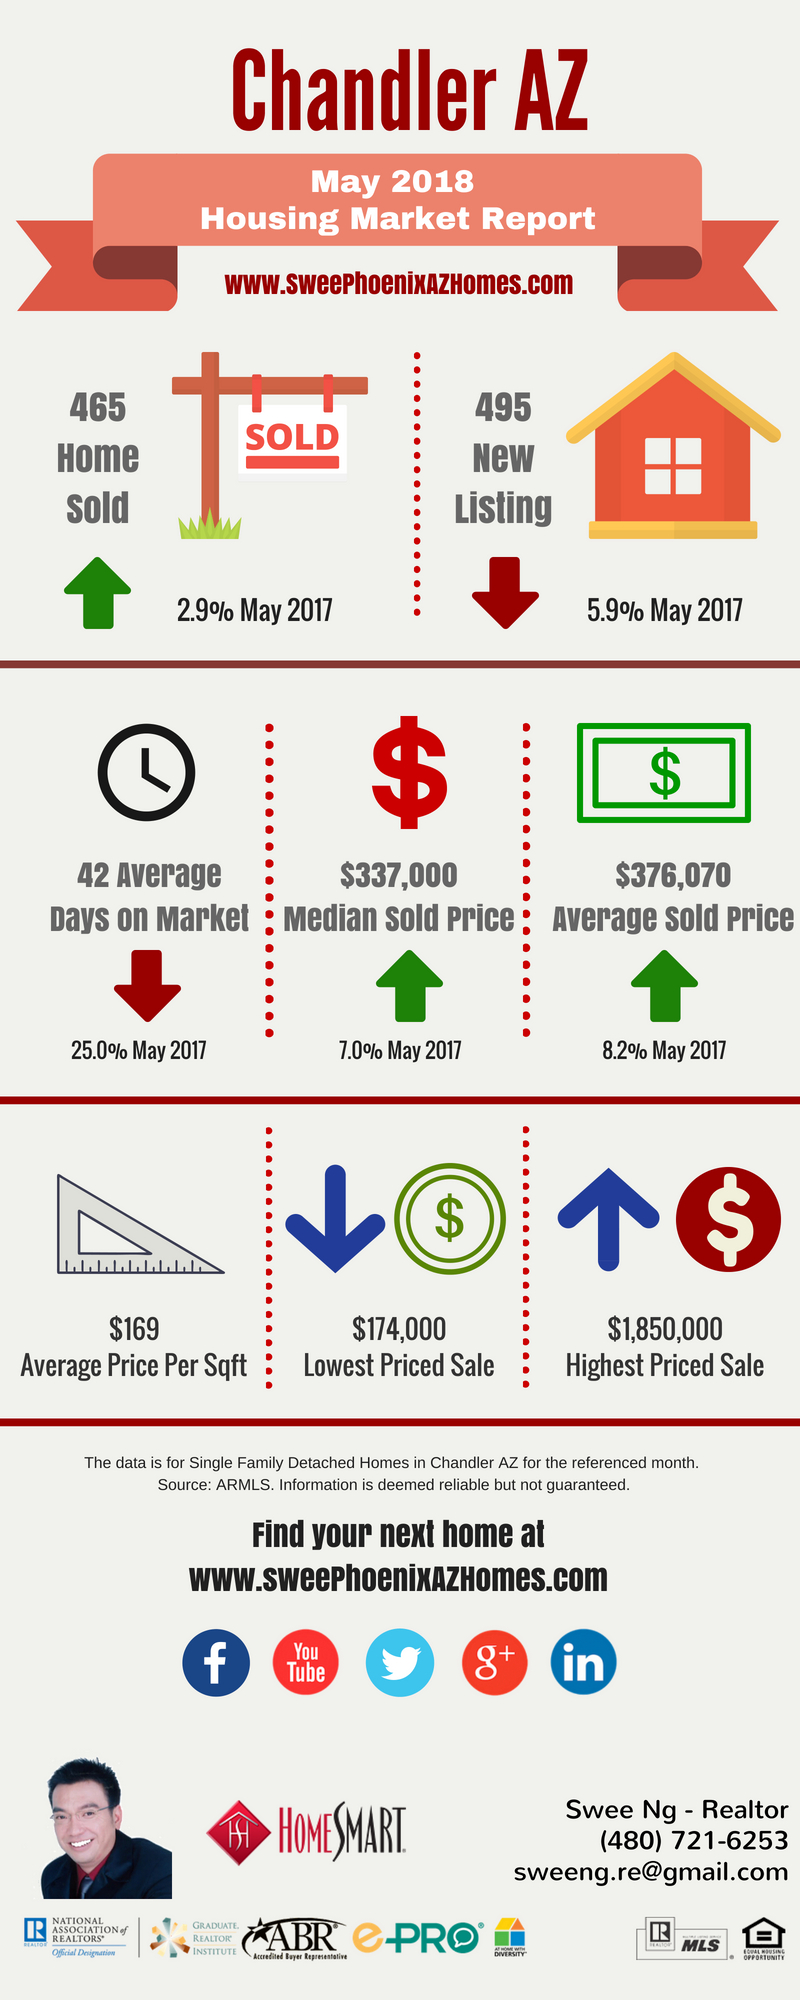 Chandler AZ Housing Market Update May 2018 by Swee Ng, House Value and Real Estate Listings